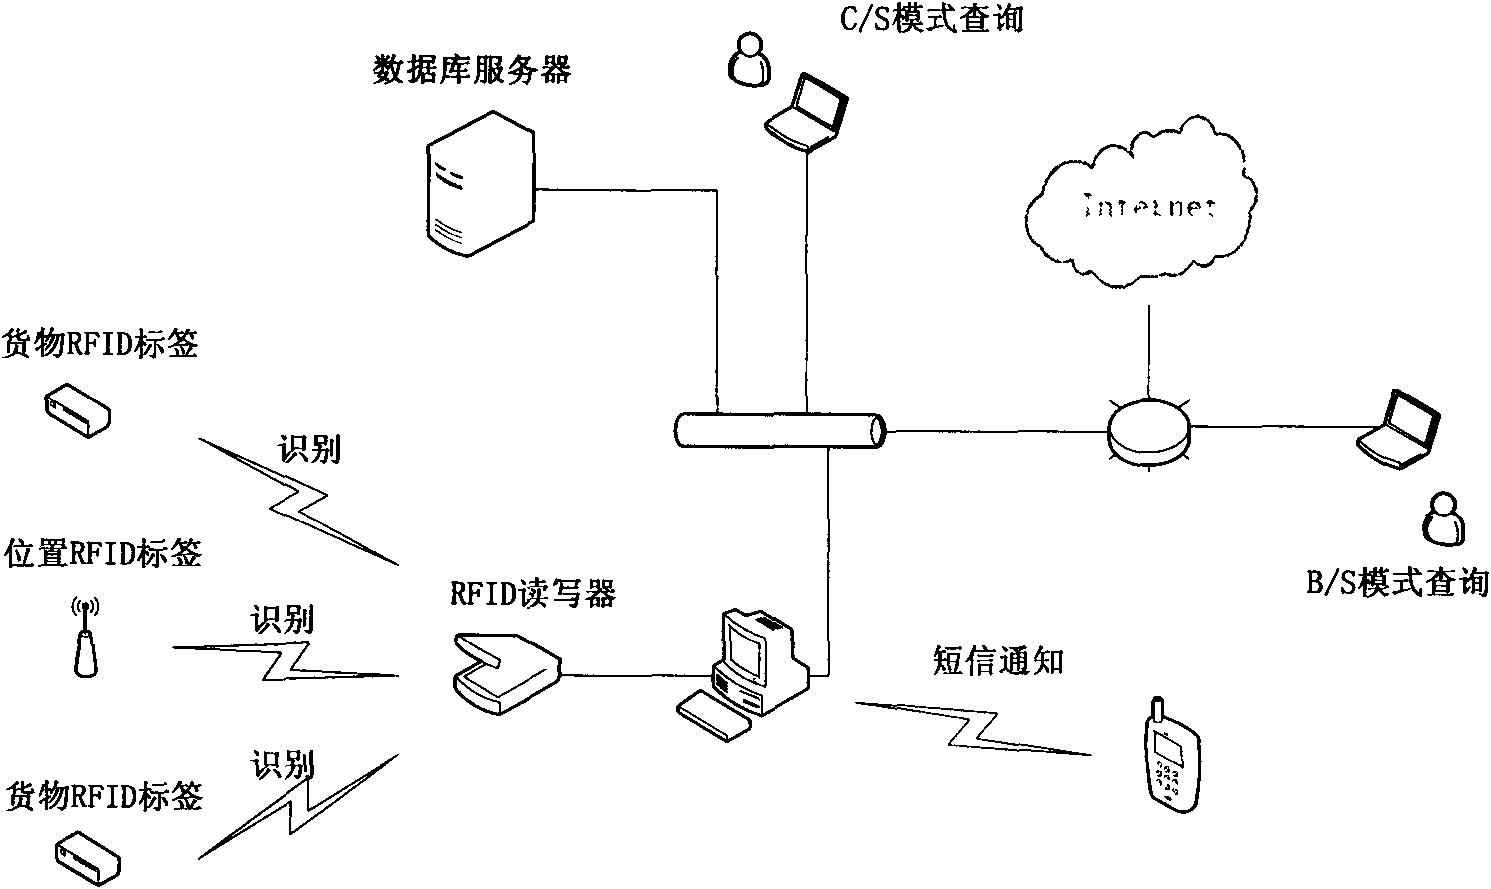 Method for realizing radio frequency identification cargo positioning management system in IOT (internet of thing) environment